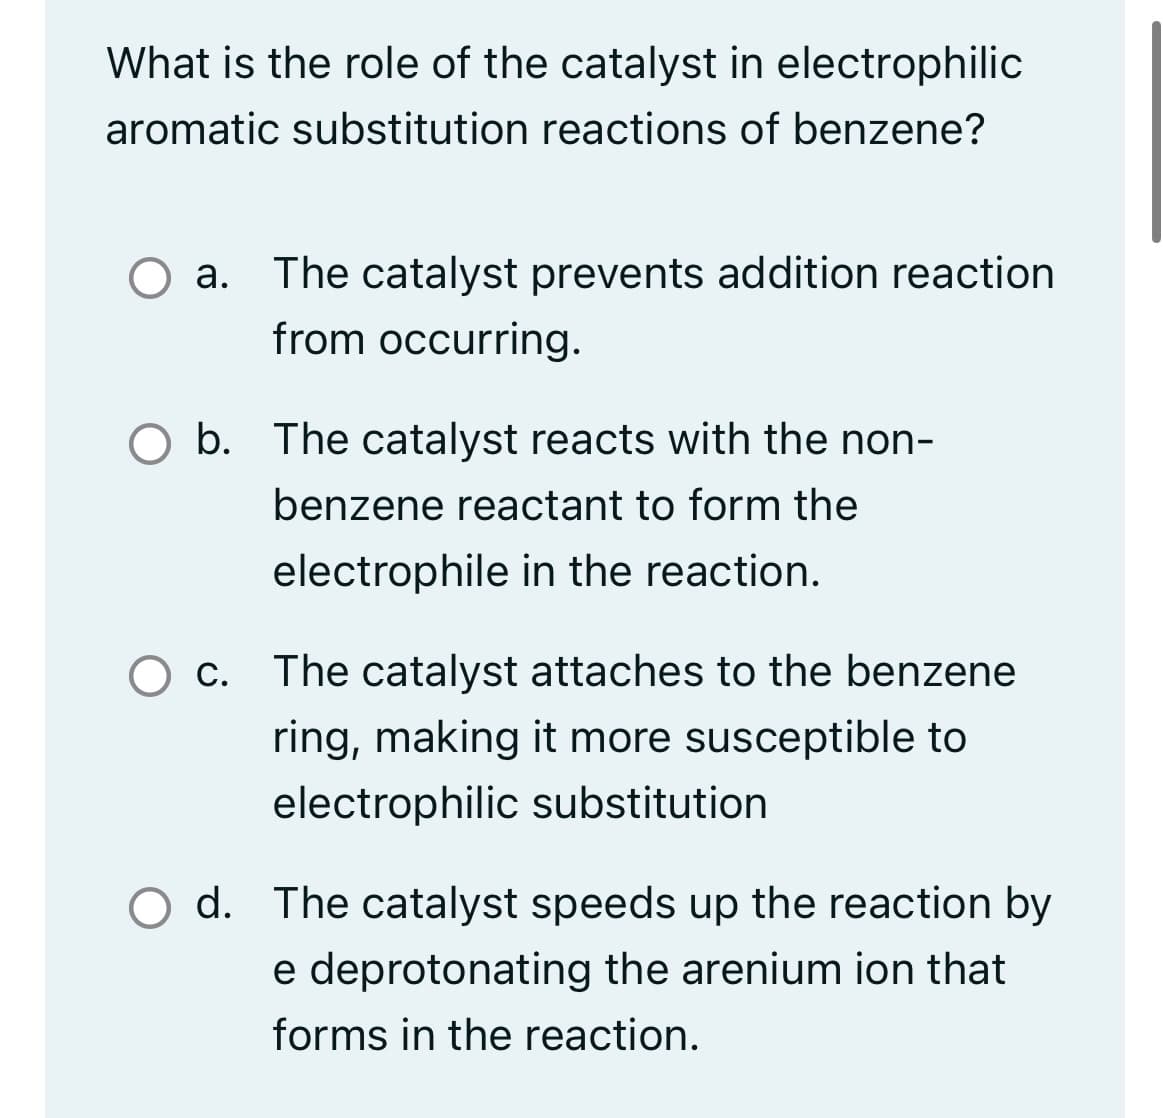 What is the role of the catalyst in electrophilic
aromatic substitution reactions of benzene?
O a. The catalyst prevents addition reaction
from occurring.
b. The catalyst reacts with the non-
benzene reactant to form the
electrophile in the reaction.
O c. The catalyst attaches to the benzene
ring, making it more susceptible to
electrophilic substitution
O d. The catalyst speeds up the reaction by
e deprotonating the arenium ion that
forms in the reaction.